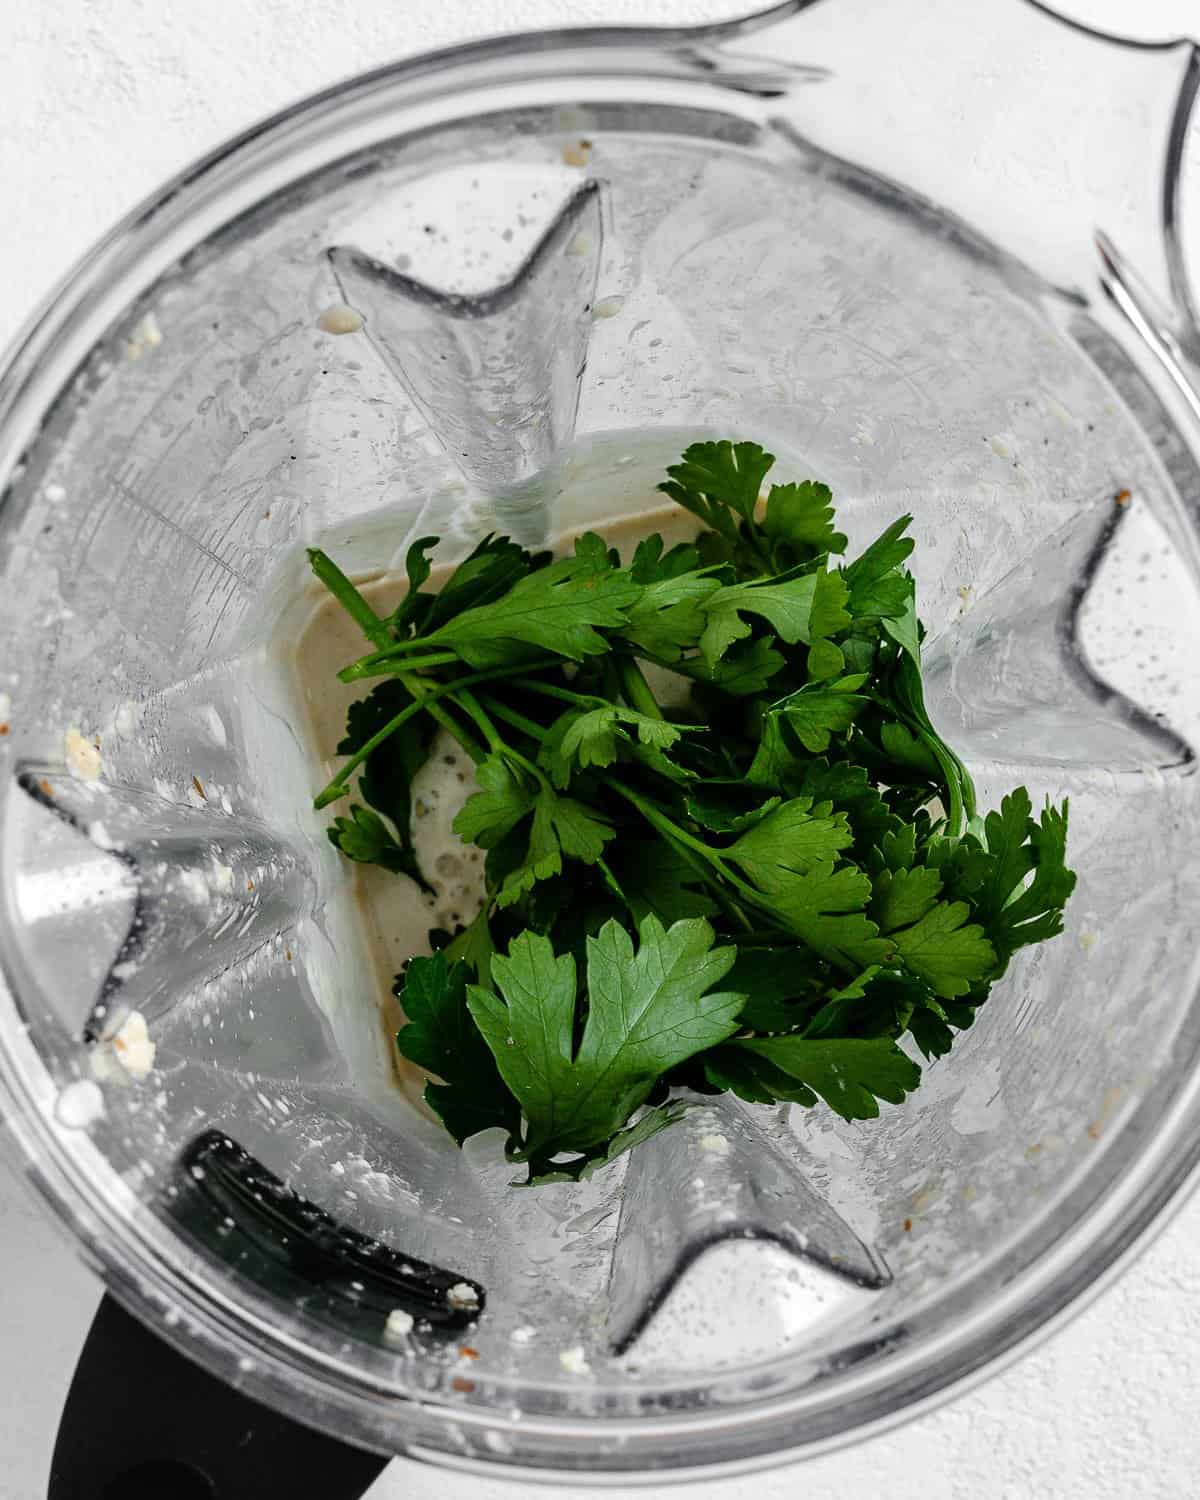 process shot showing addition of cilantro in blender